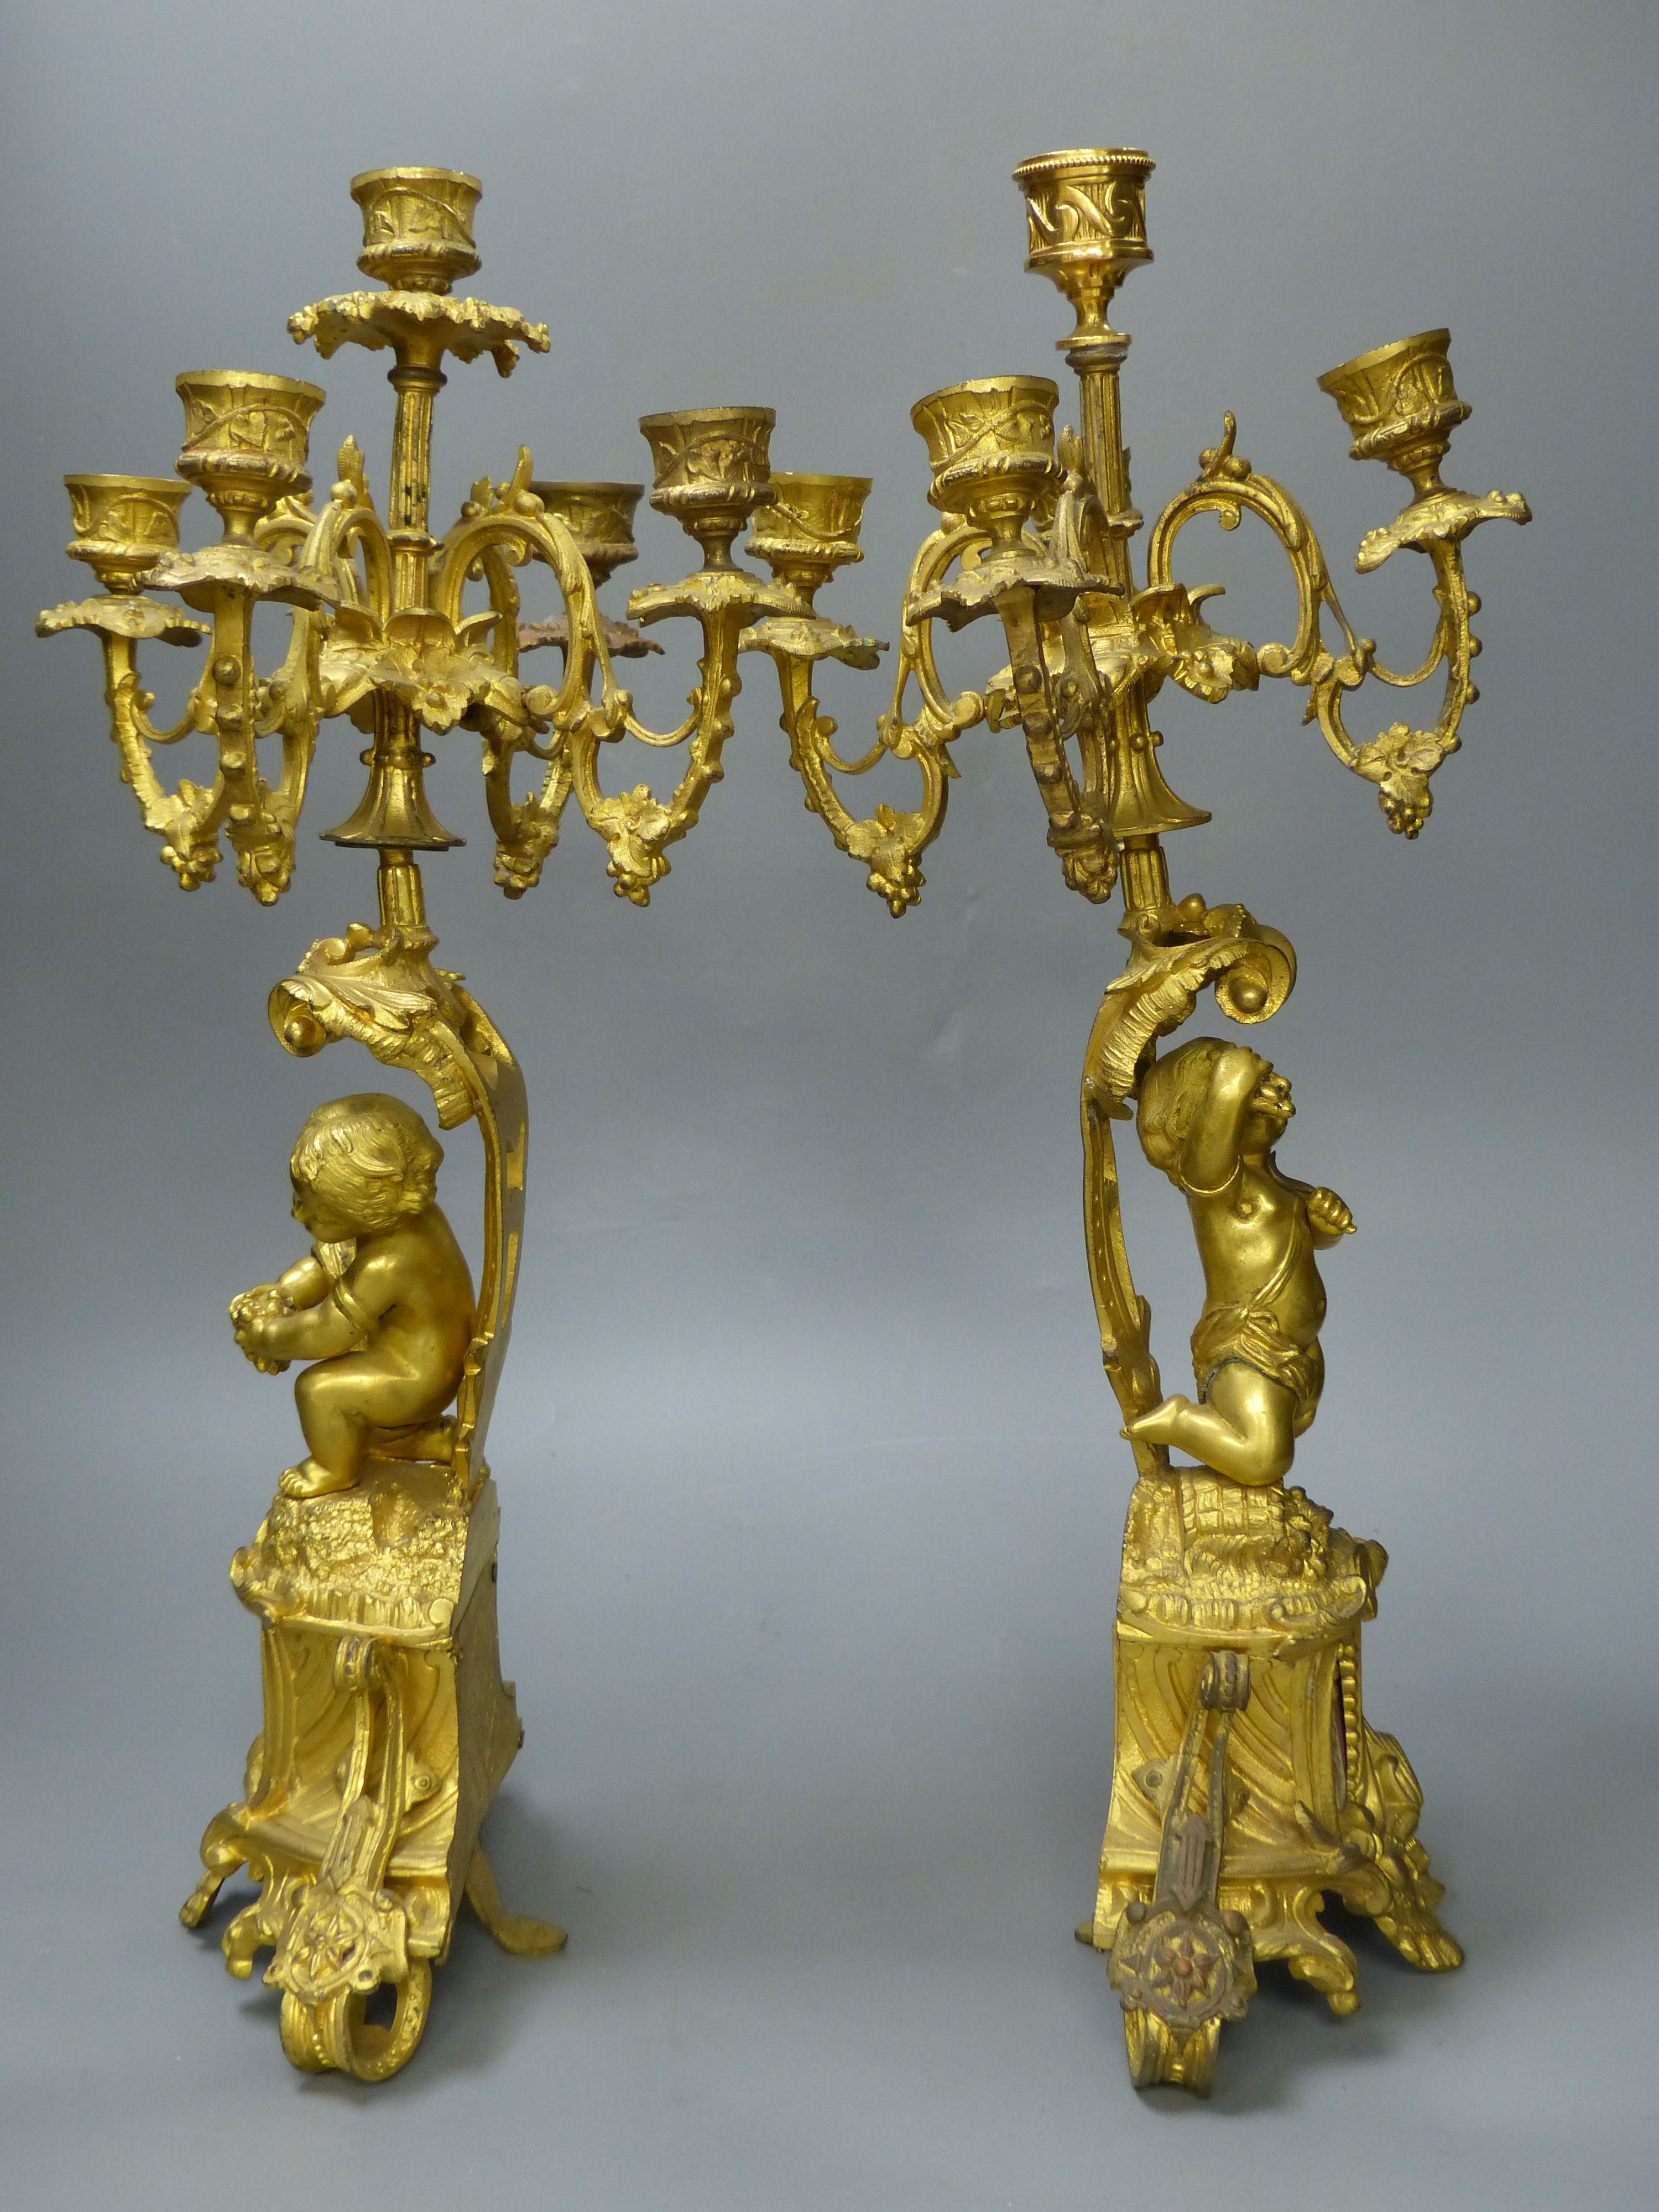 A pair of 19th century French ormolu cherub candelabra, with porcelain plaques to base, height 47.5cm